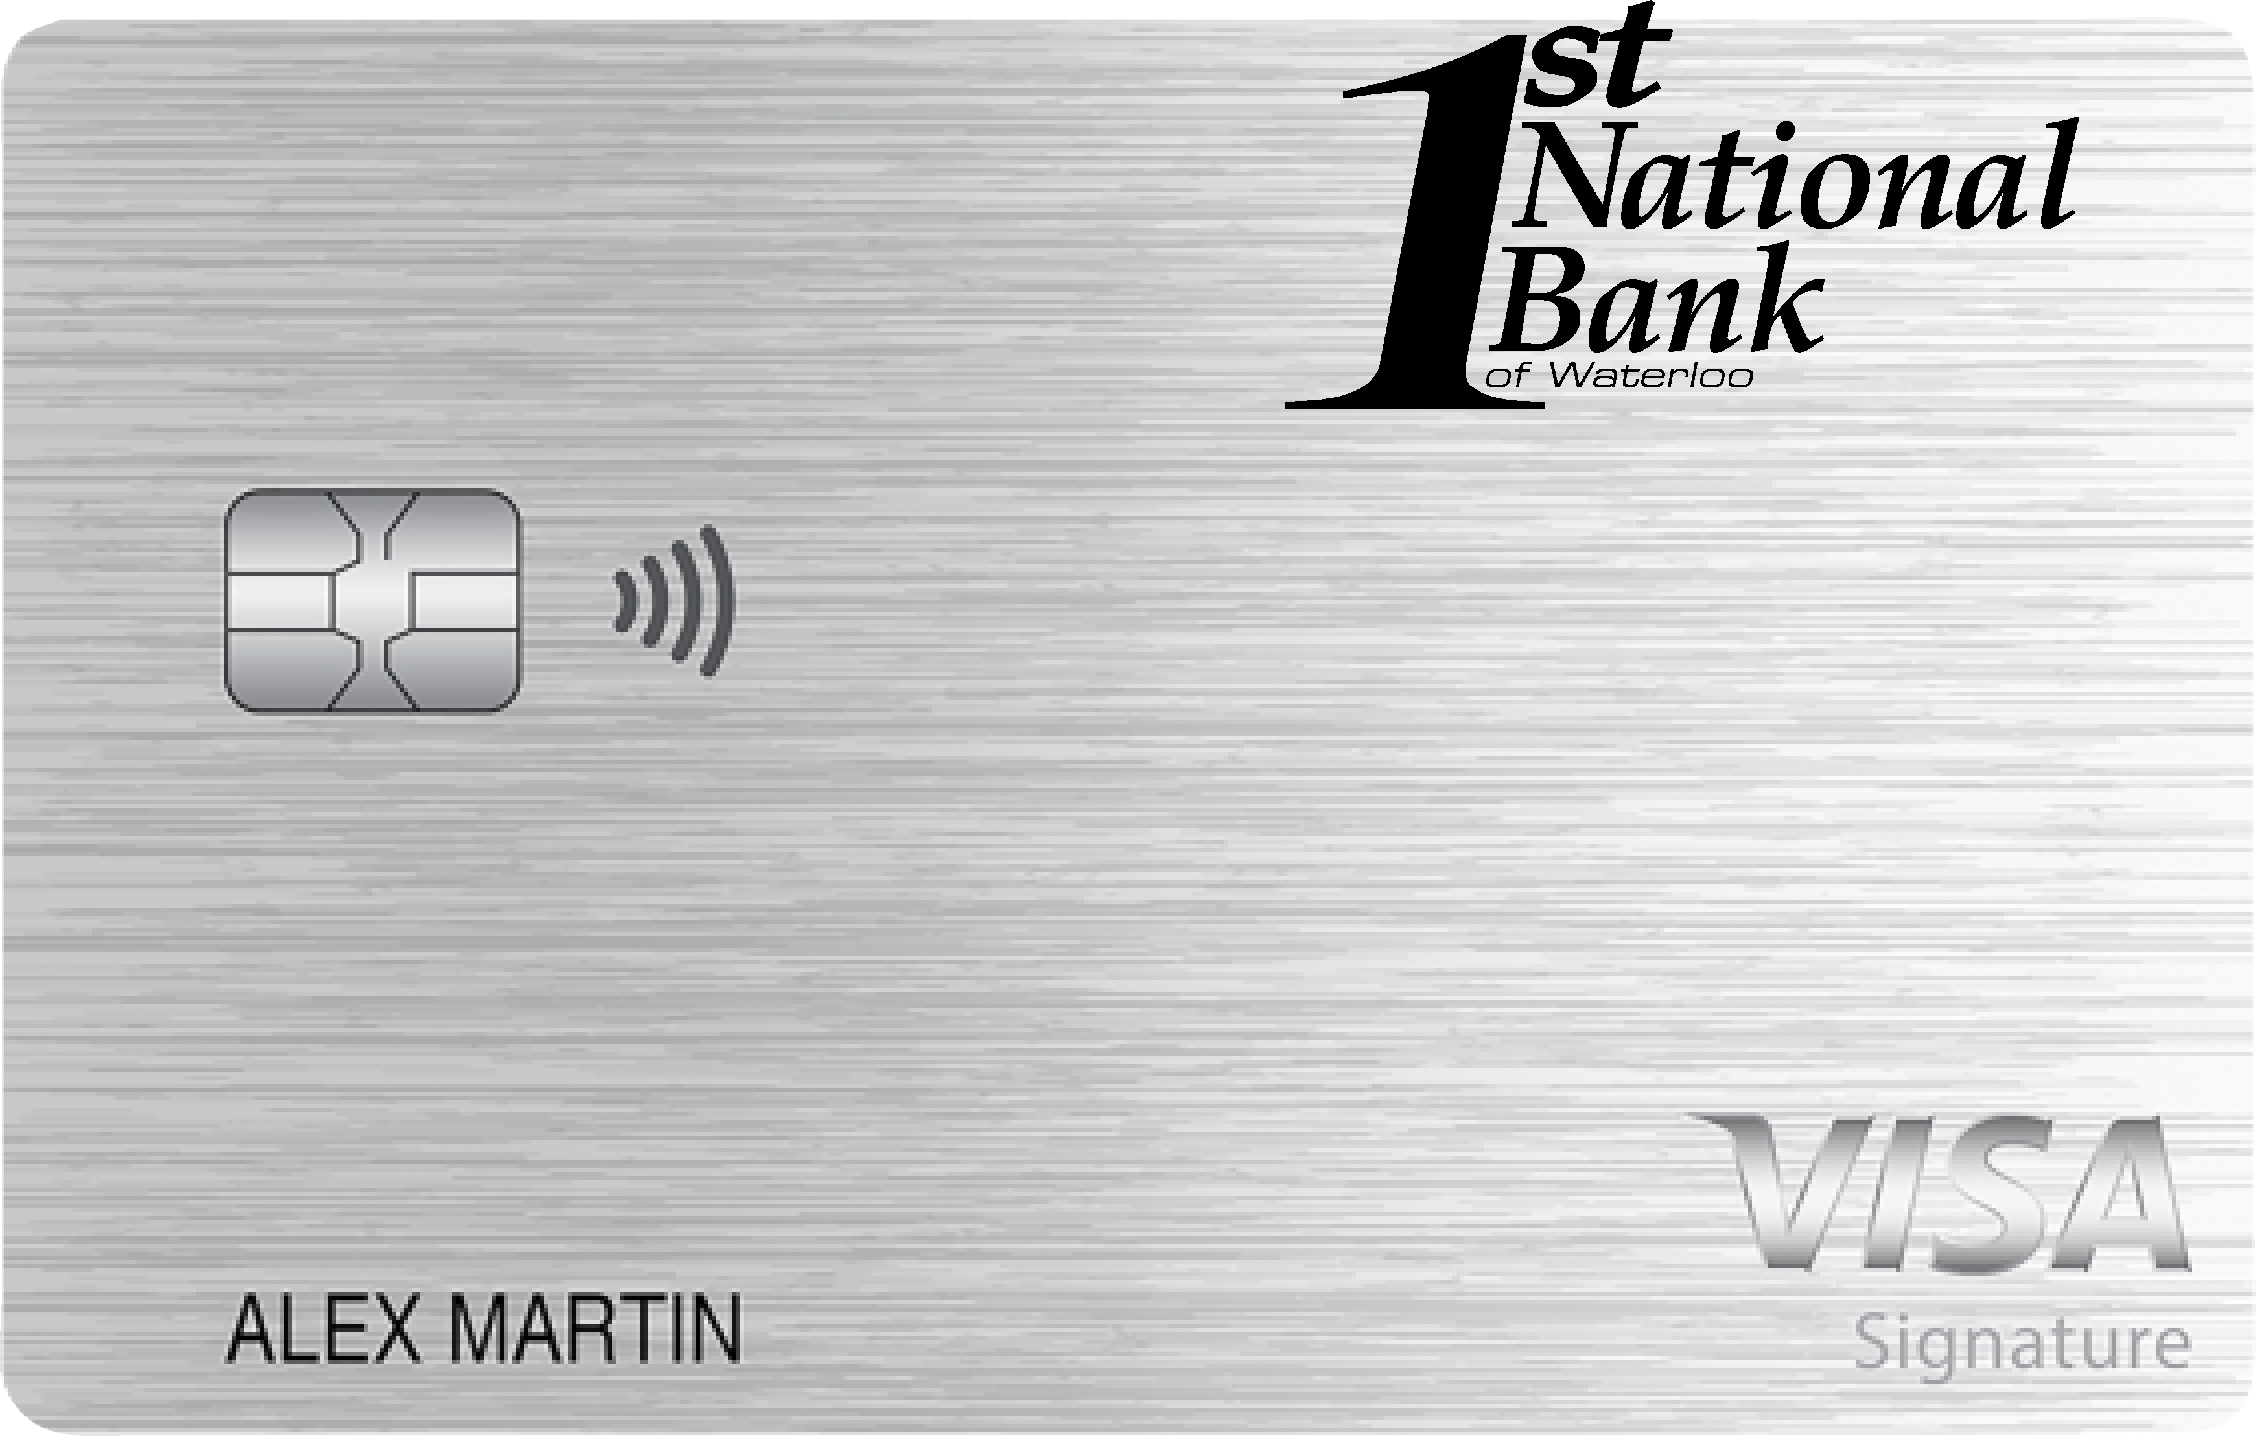 First National Bank of Waterloo Max Cash Preferred Card